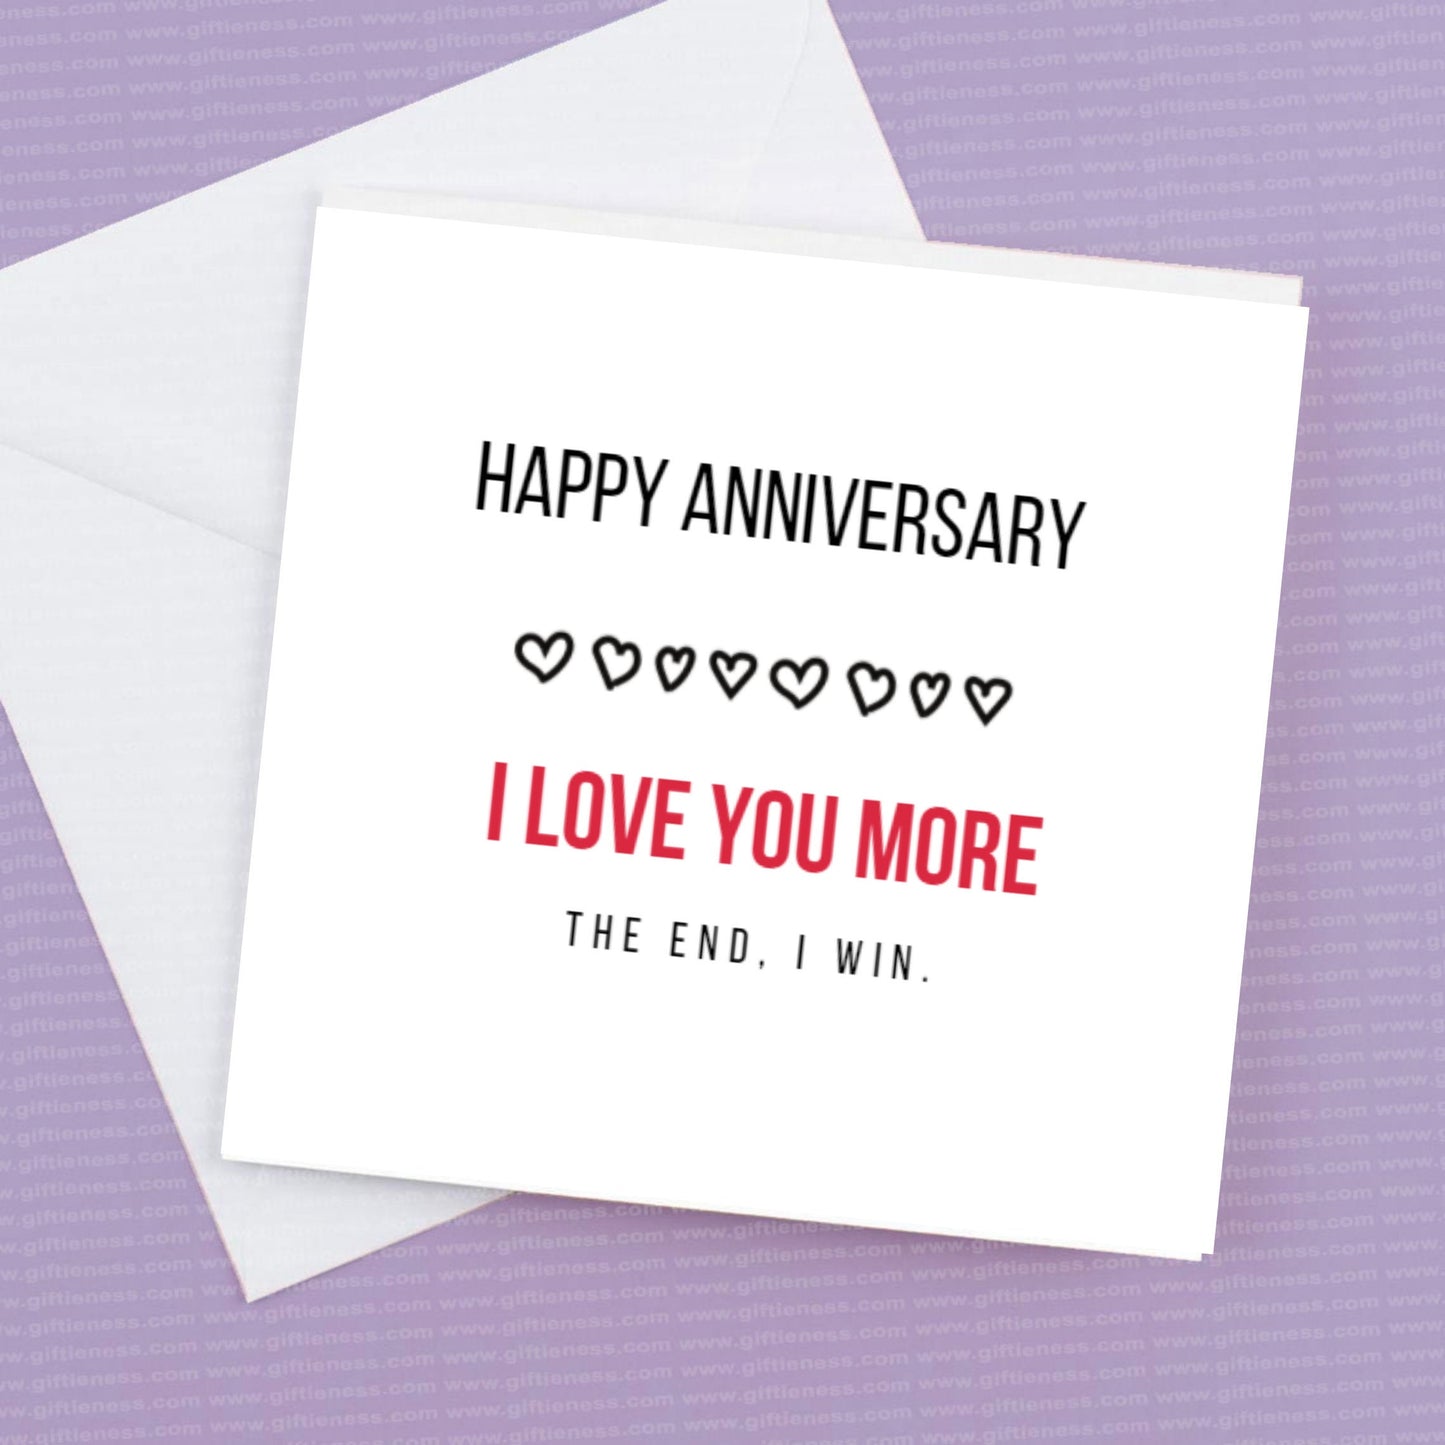 Happy Anniversary  - I Love you more, The End, I win.